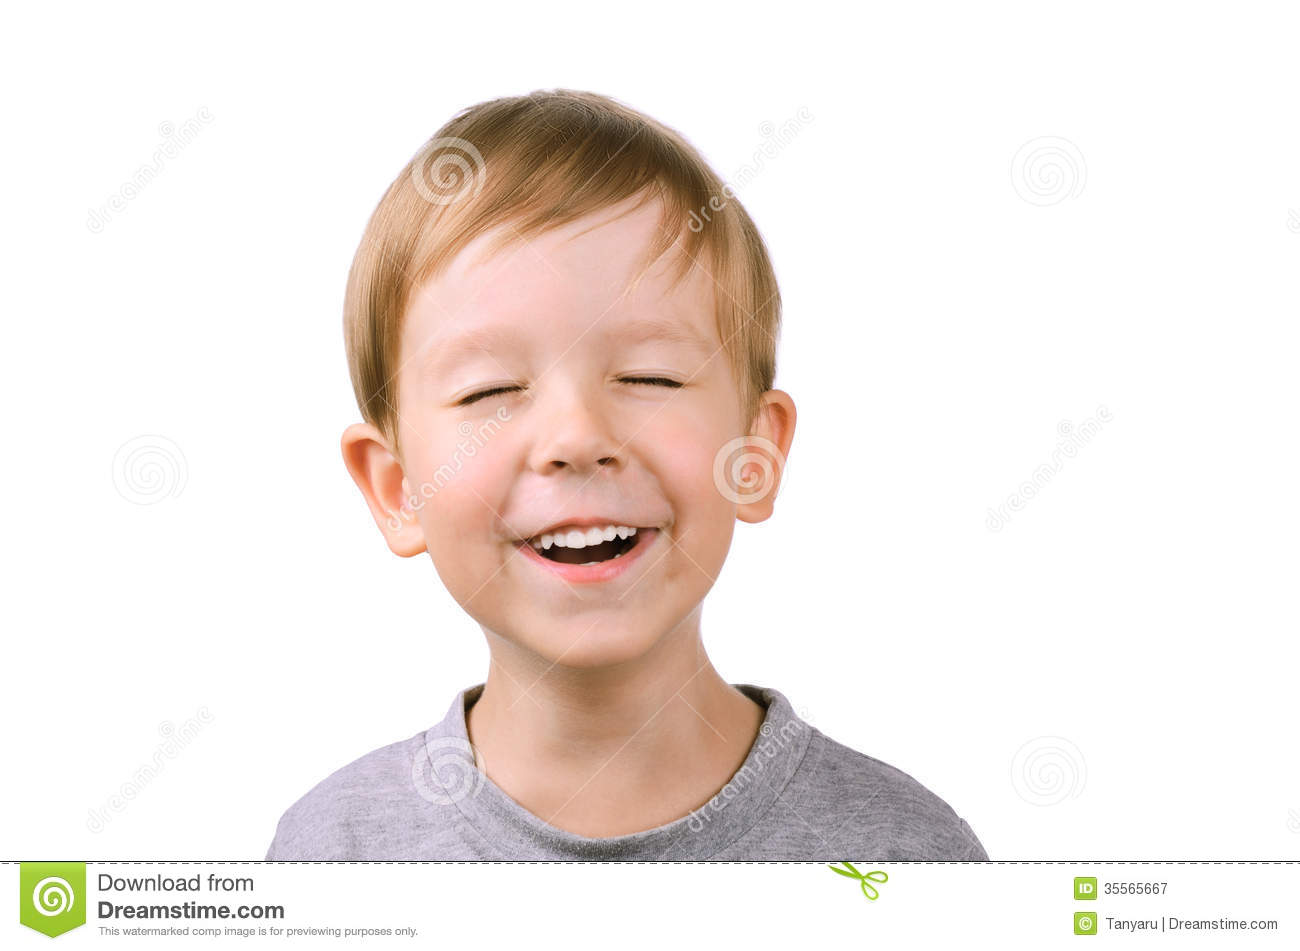 Boy Laughing With Eyes Closed Royalty Free Stock Photography   Image